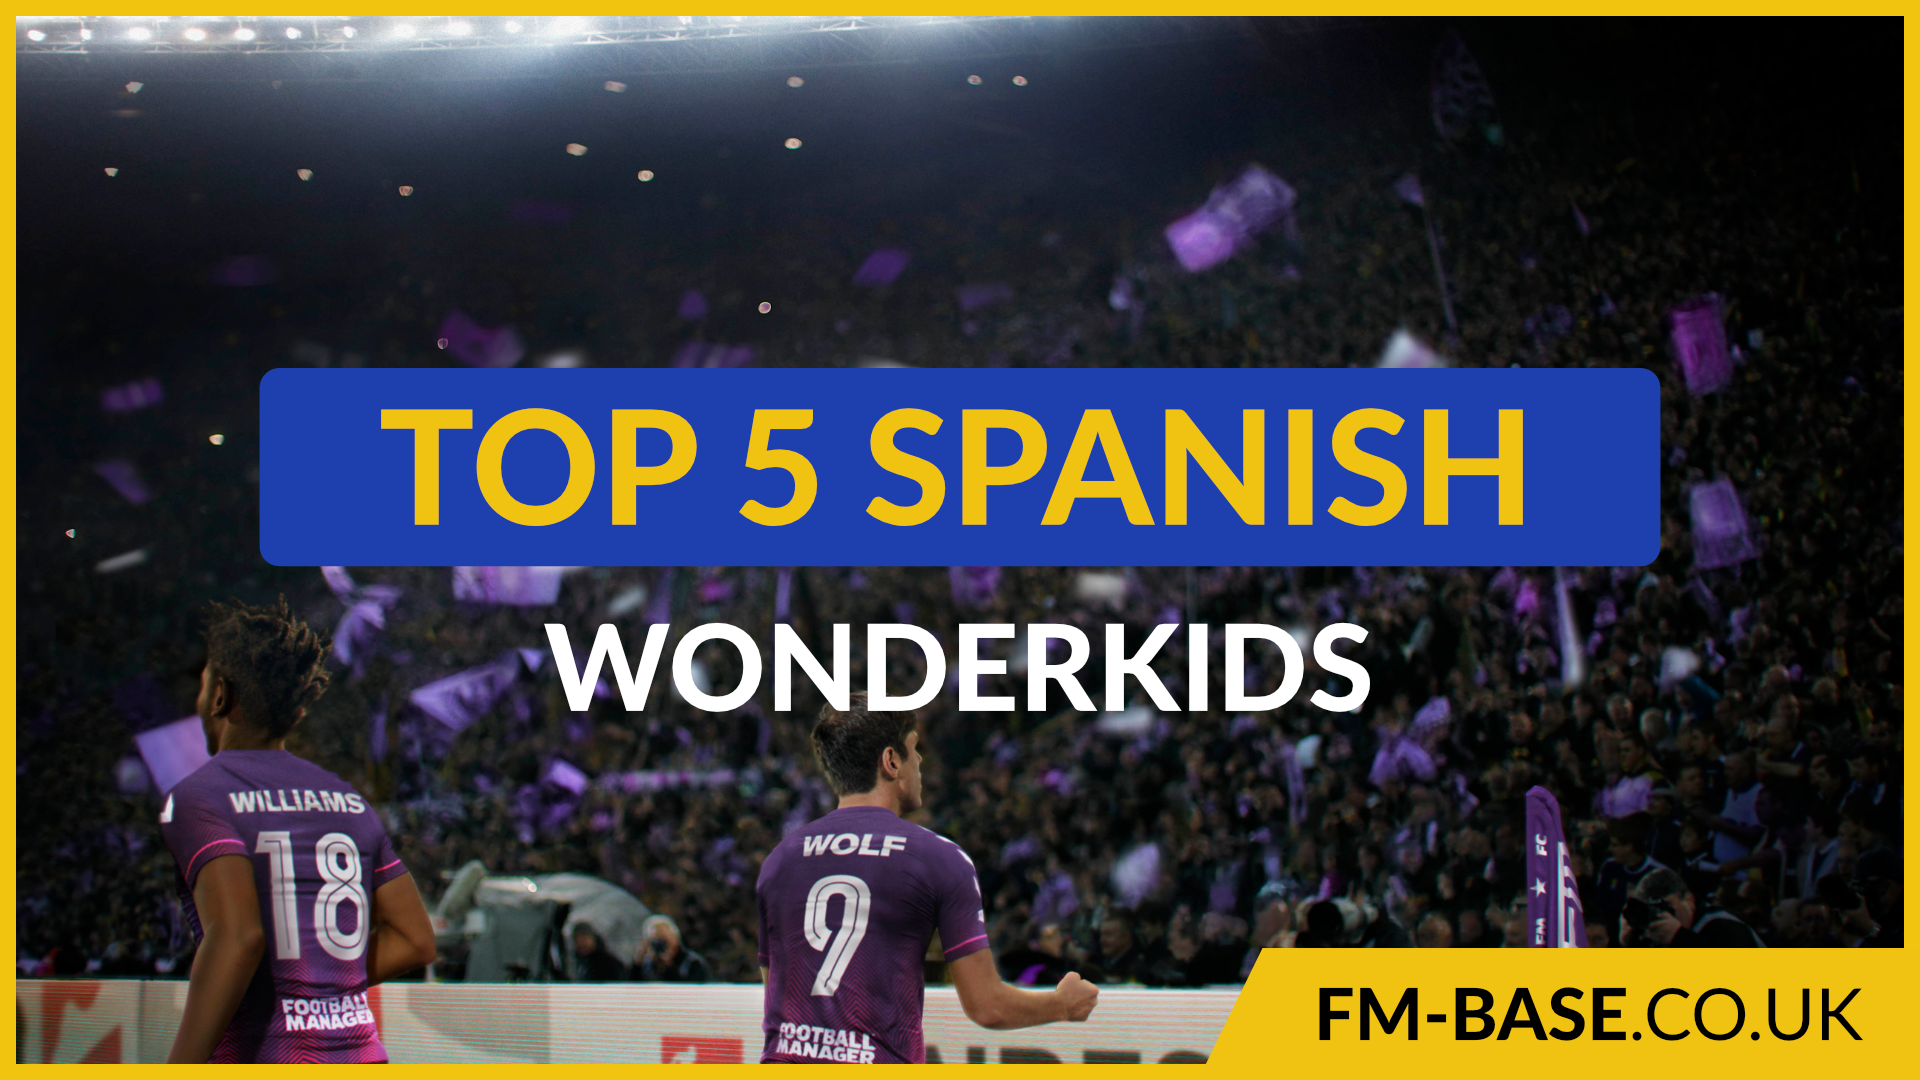 The Top 5 Spanish Wonderkids in Football Manager 2022